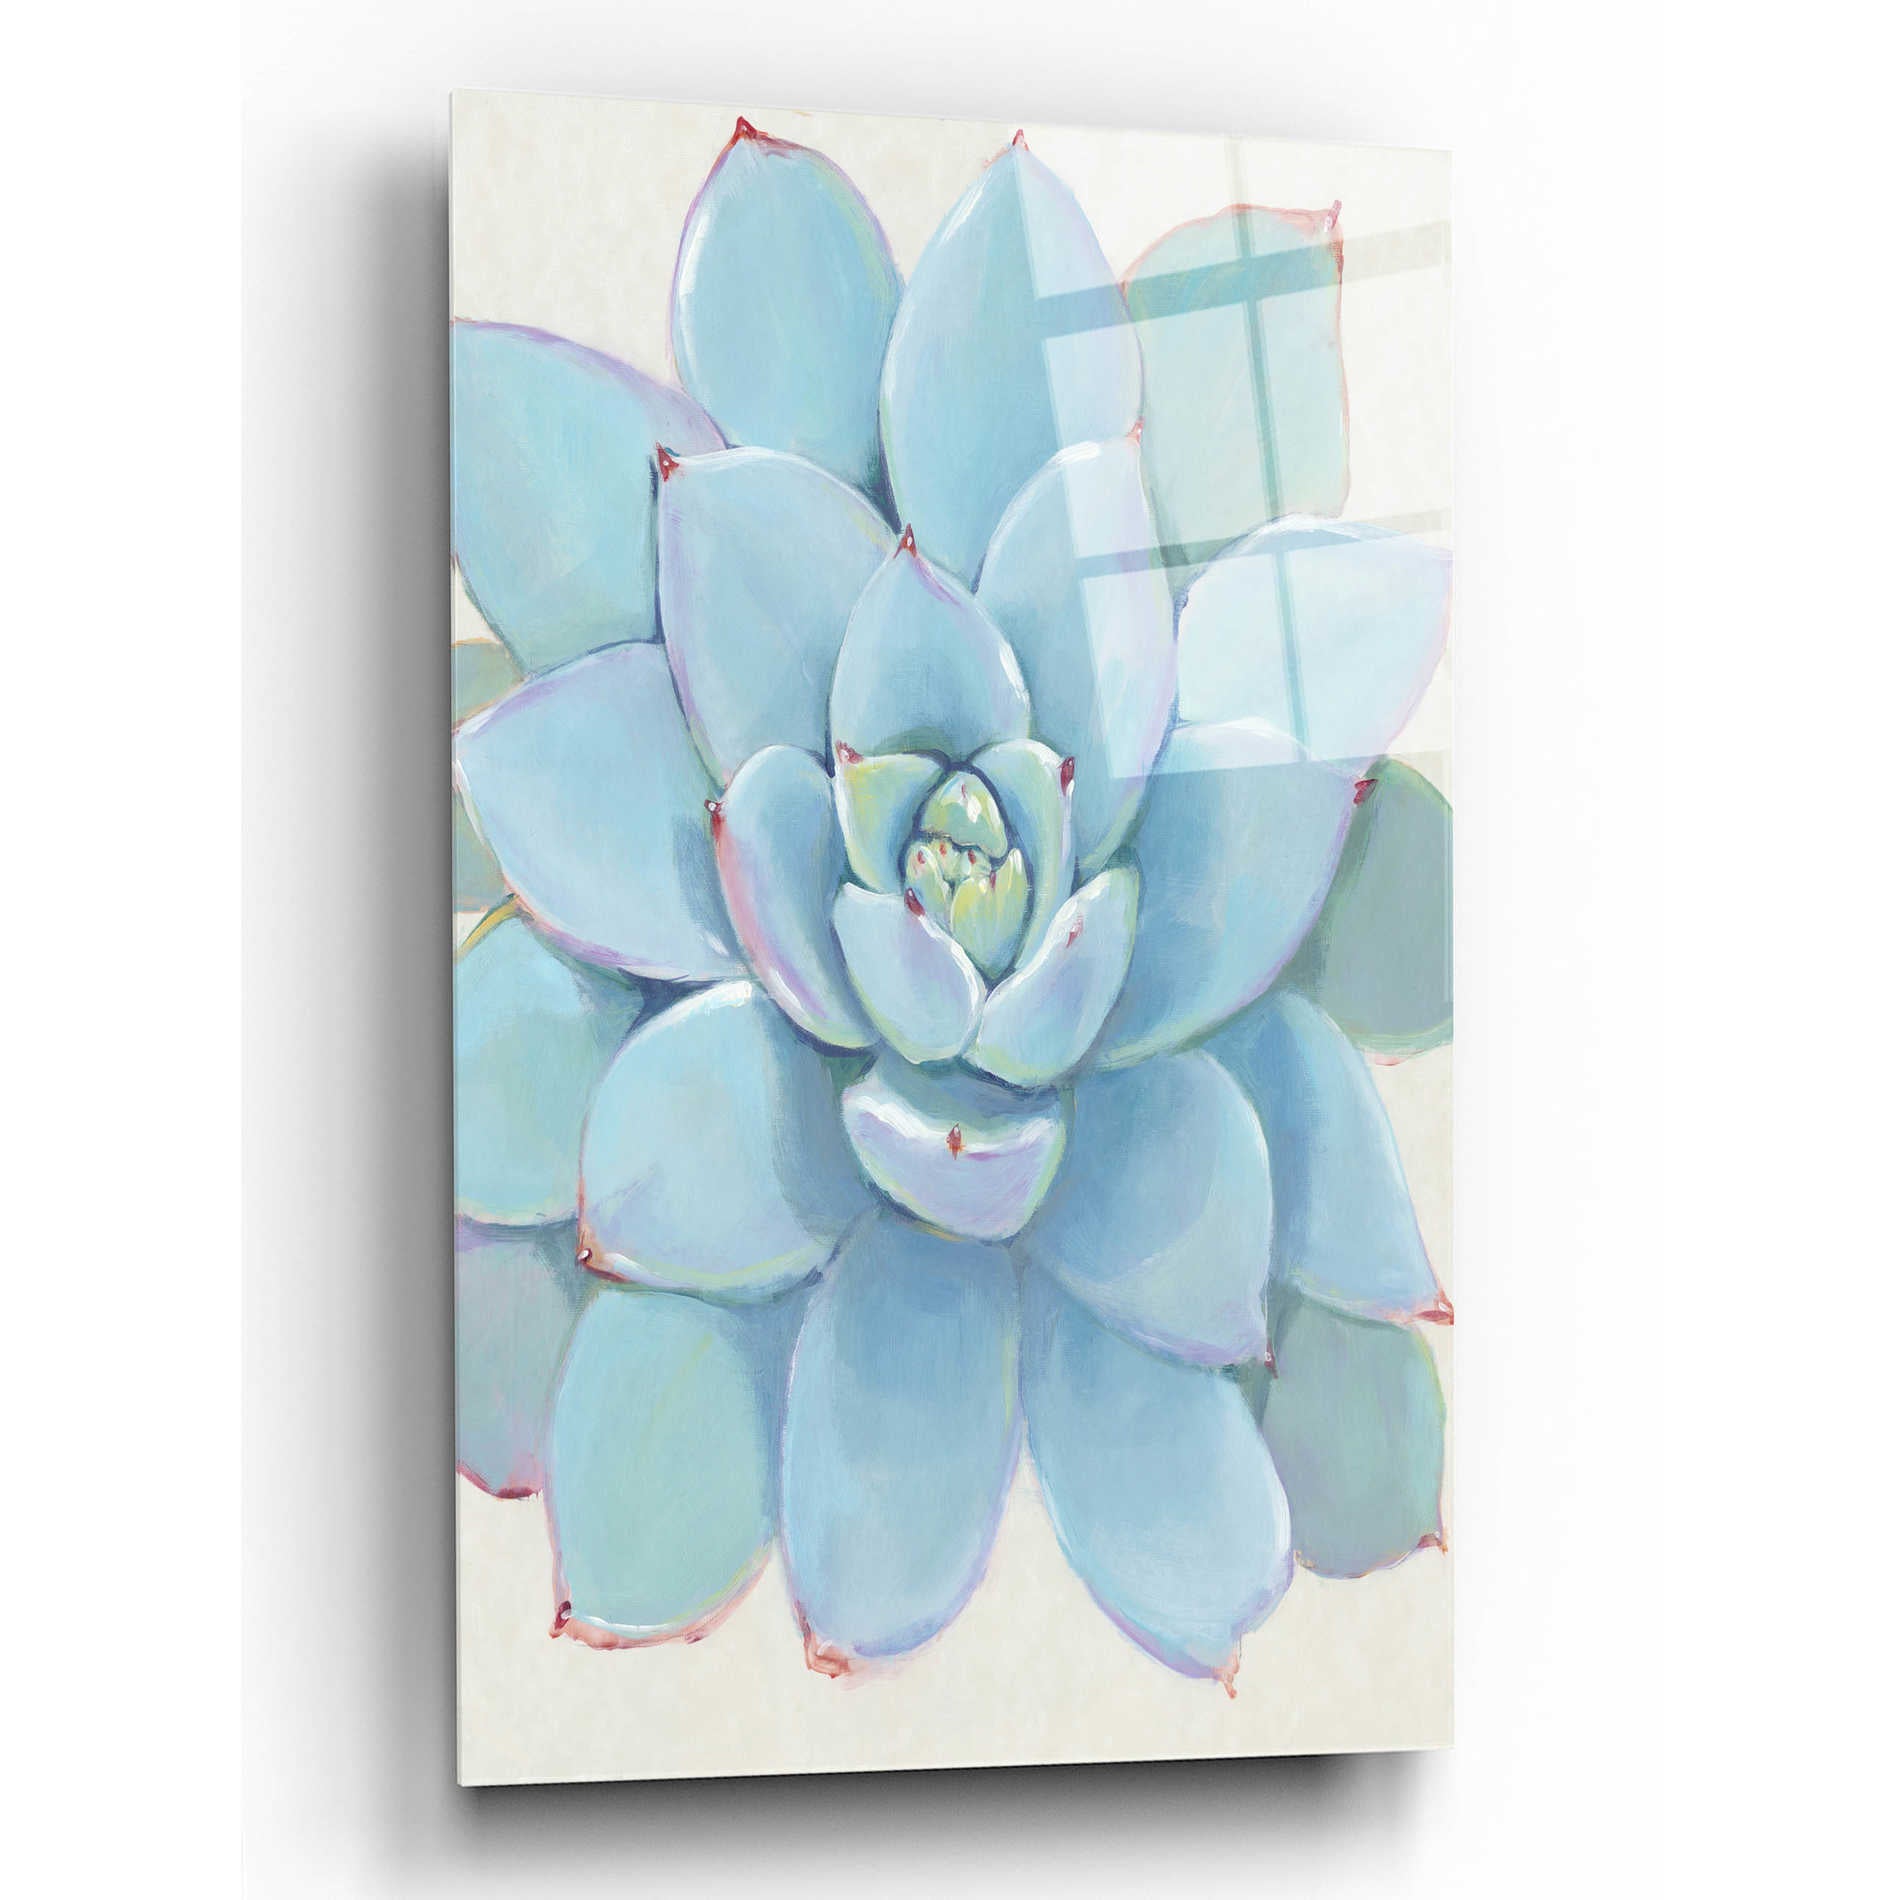 Epic Art 'Pastel Succulent I' by Tim O'Toole, Acrylic Glass Wall Art